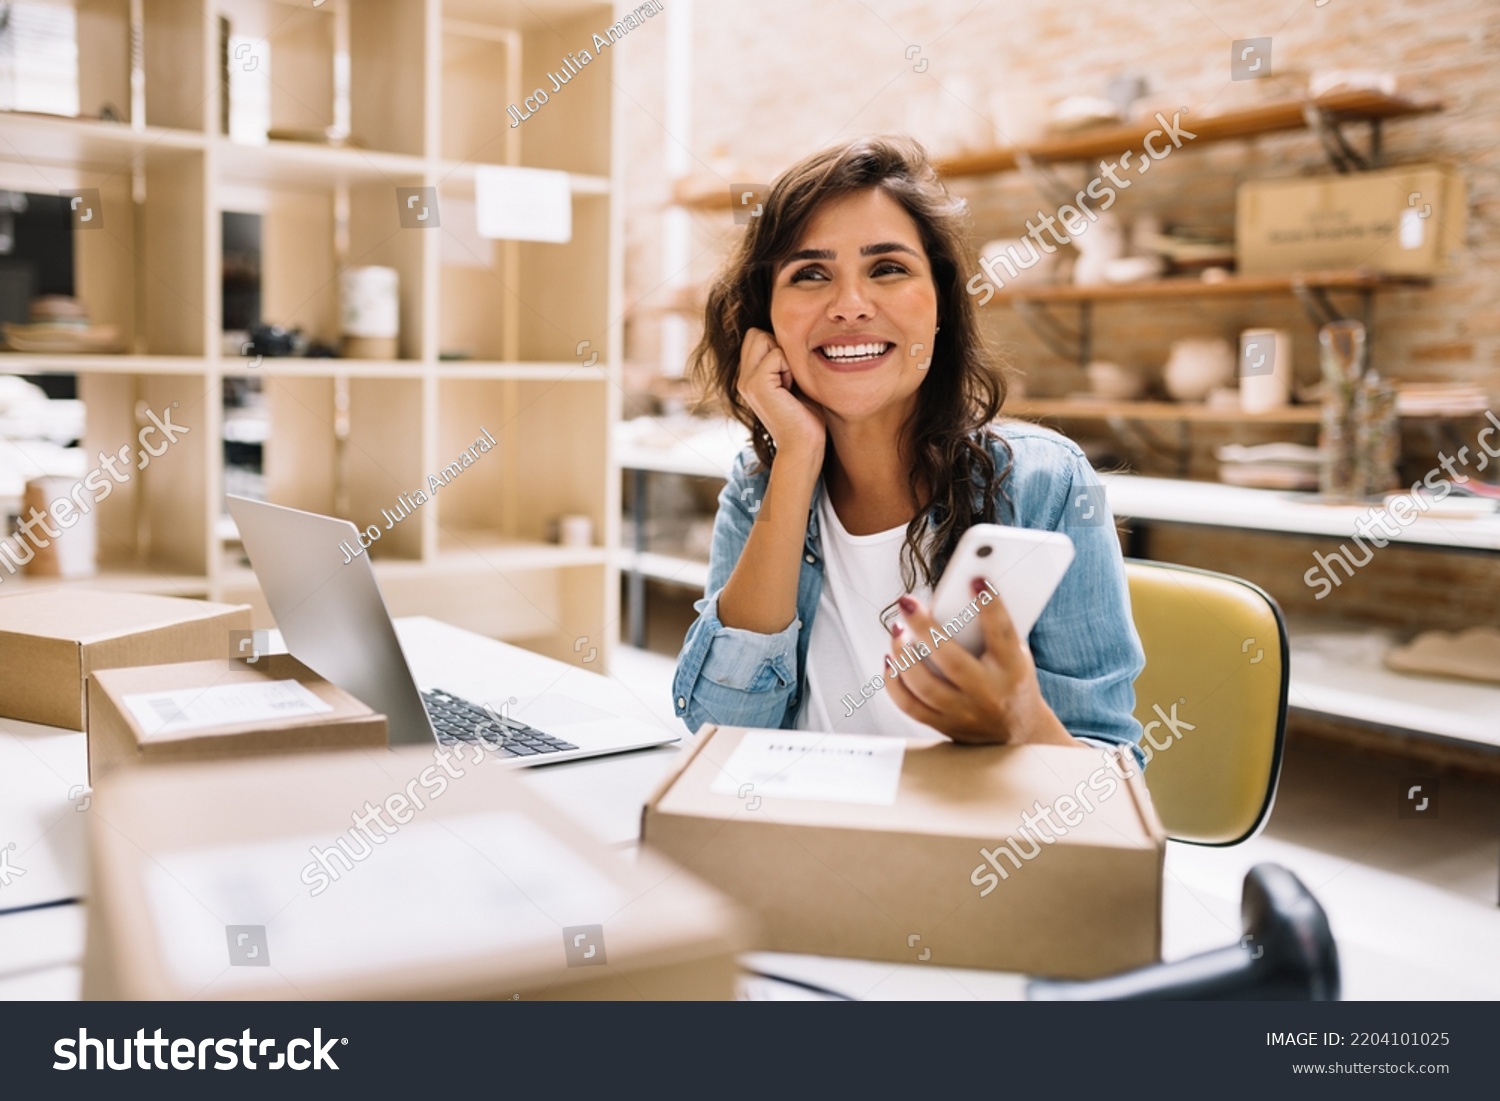 Cheerful online store owner looking away thoughtfully while holding a smartphone. Female entrepreneur preparing orders for shipping in a warehouse. Businesswoman running an e-commerce small business. #2204101025